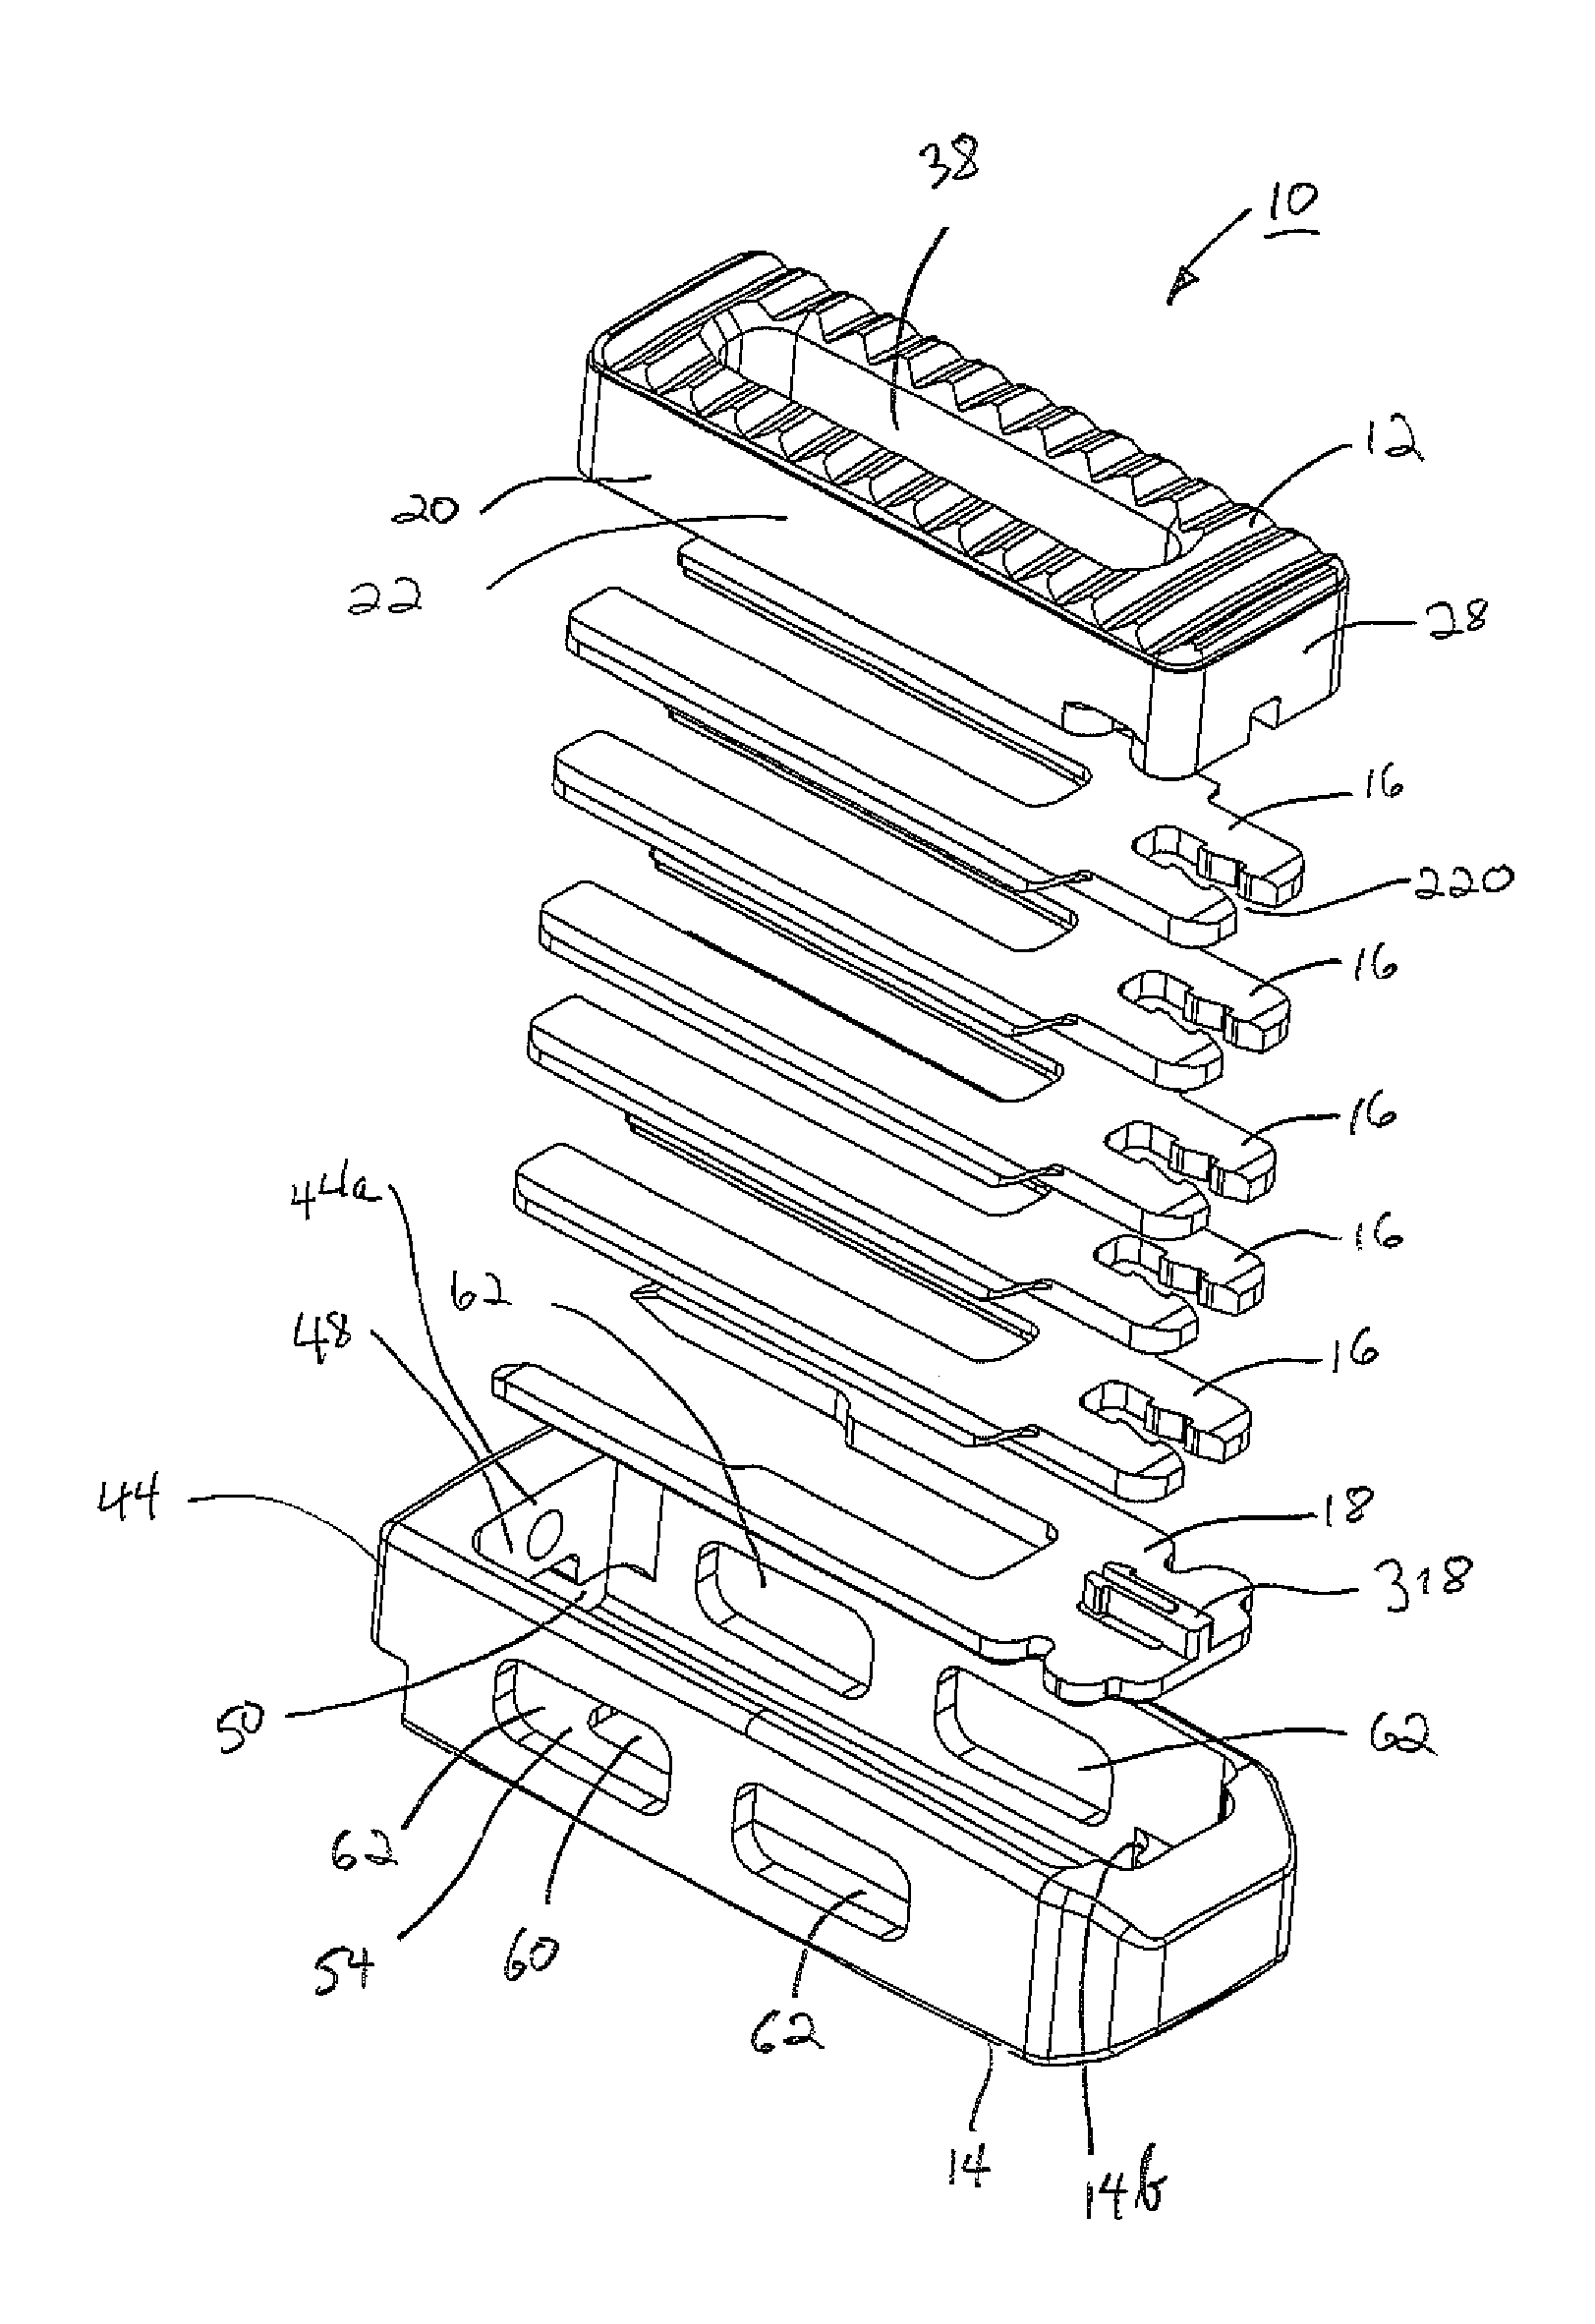 Expandable spinal interbody fusion device